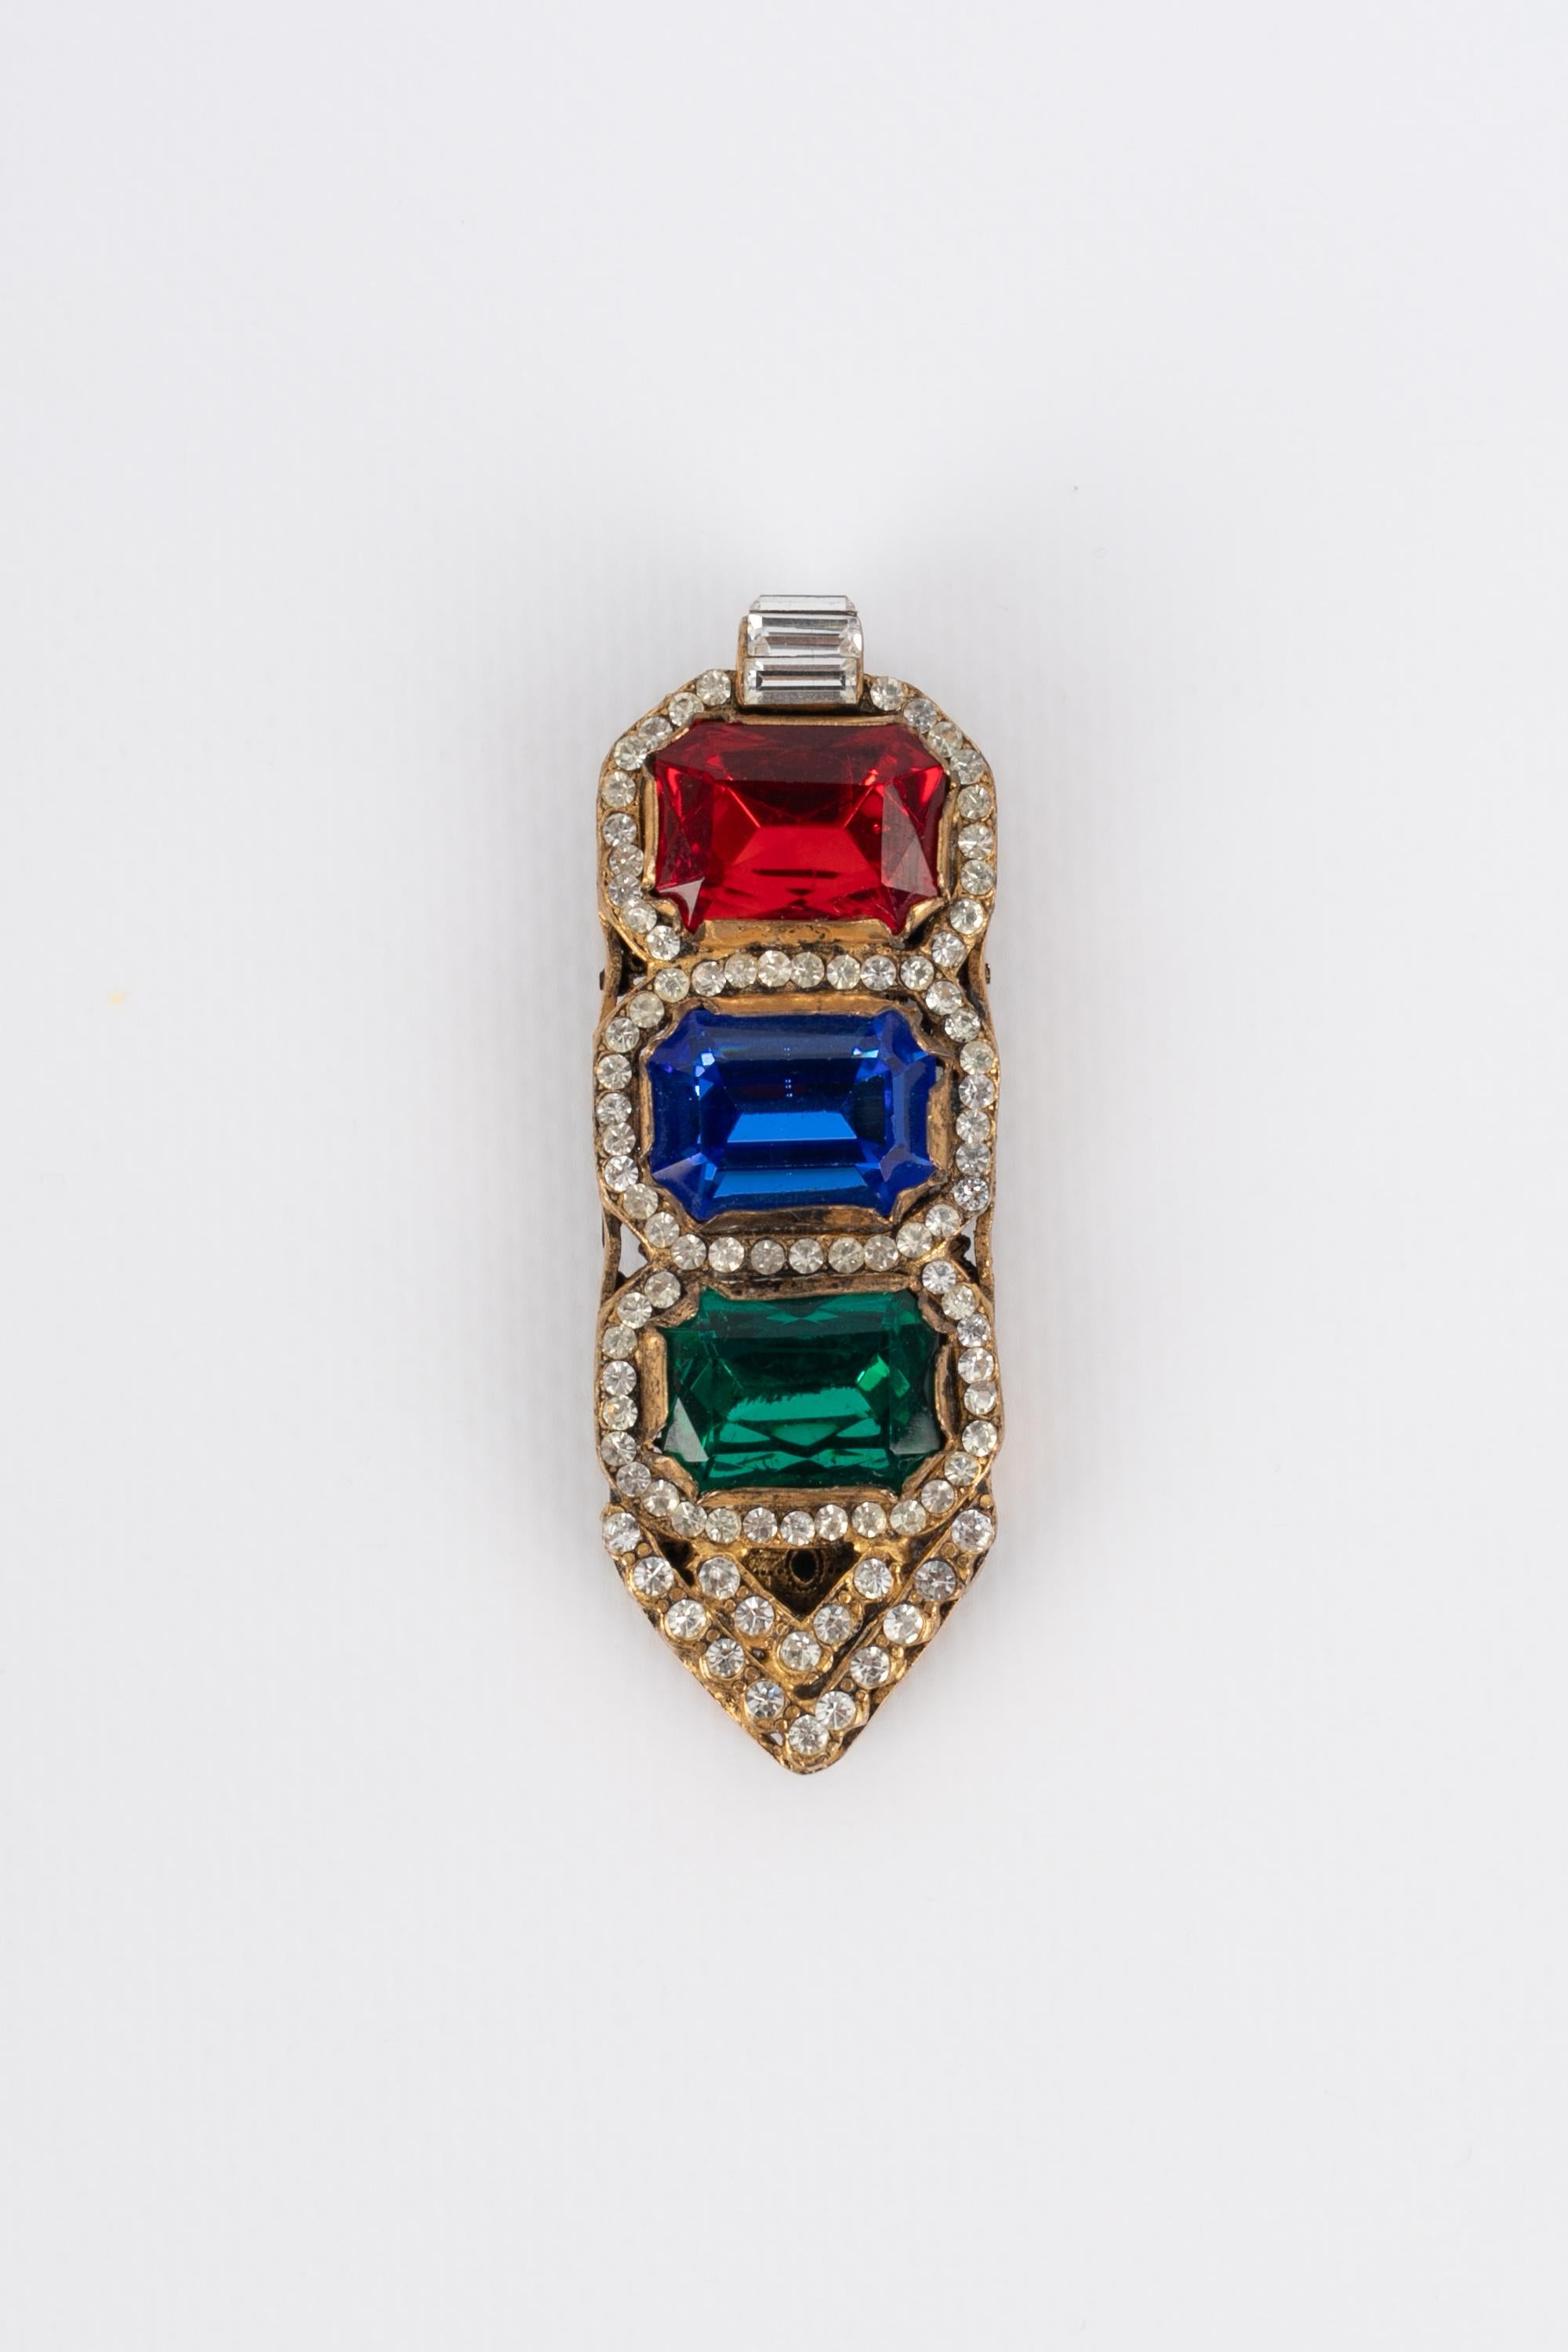 CHANEL - (Made in France) Golden metal plier-like brooch ornamented with Swarovski rhinestones. Collection from the beginning of the 1980s.

Condition:
Good condition

Dimensions:
7.5 cm x 2.5 cm

BRB102